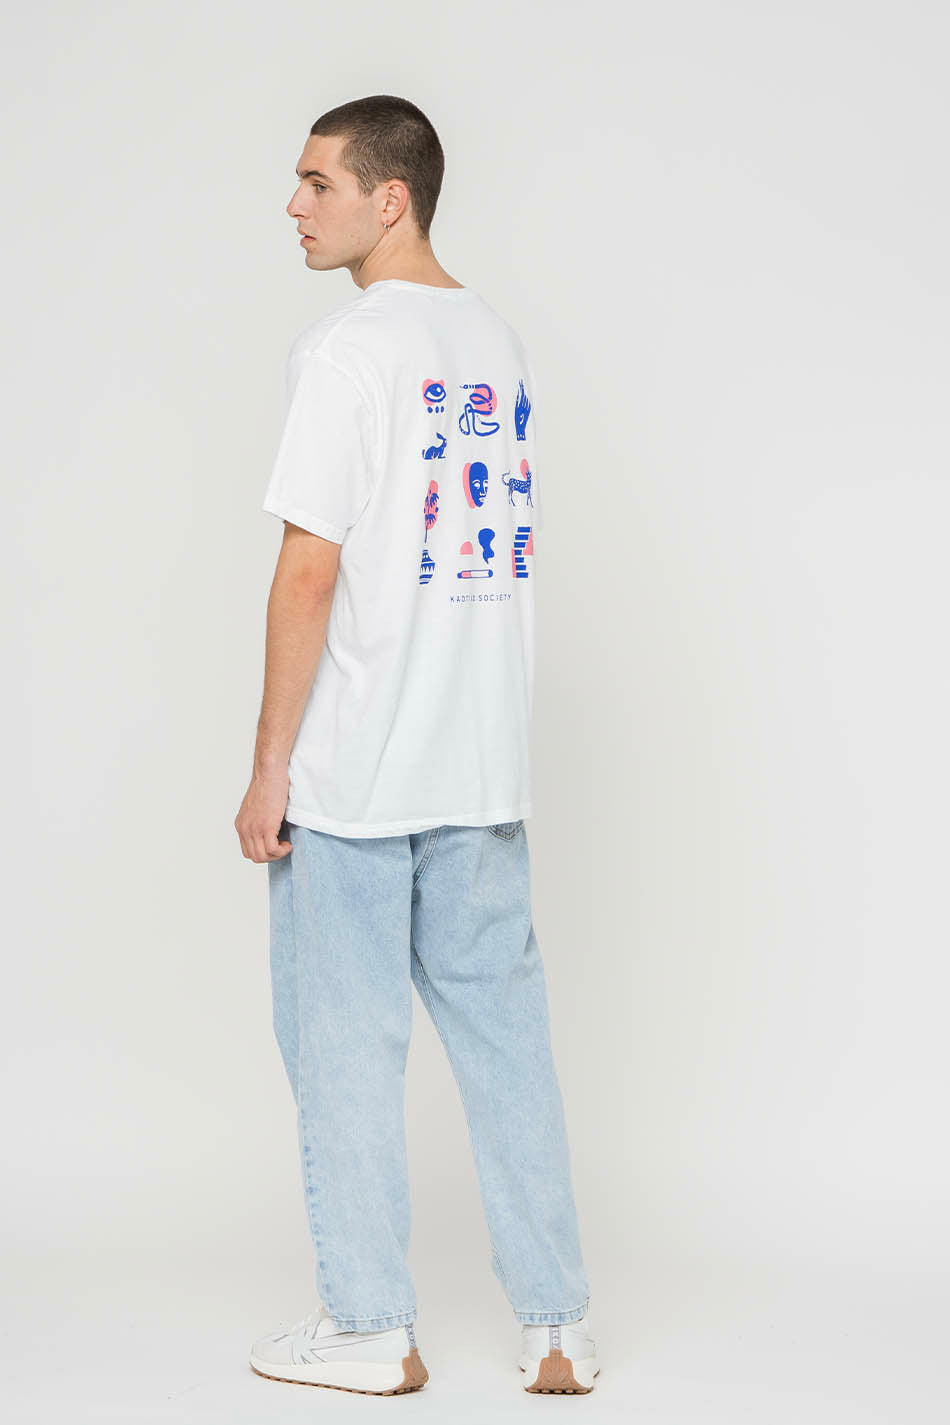 T-Shirt Washed Elements Ocult - Coton